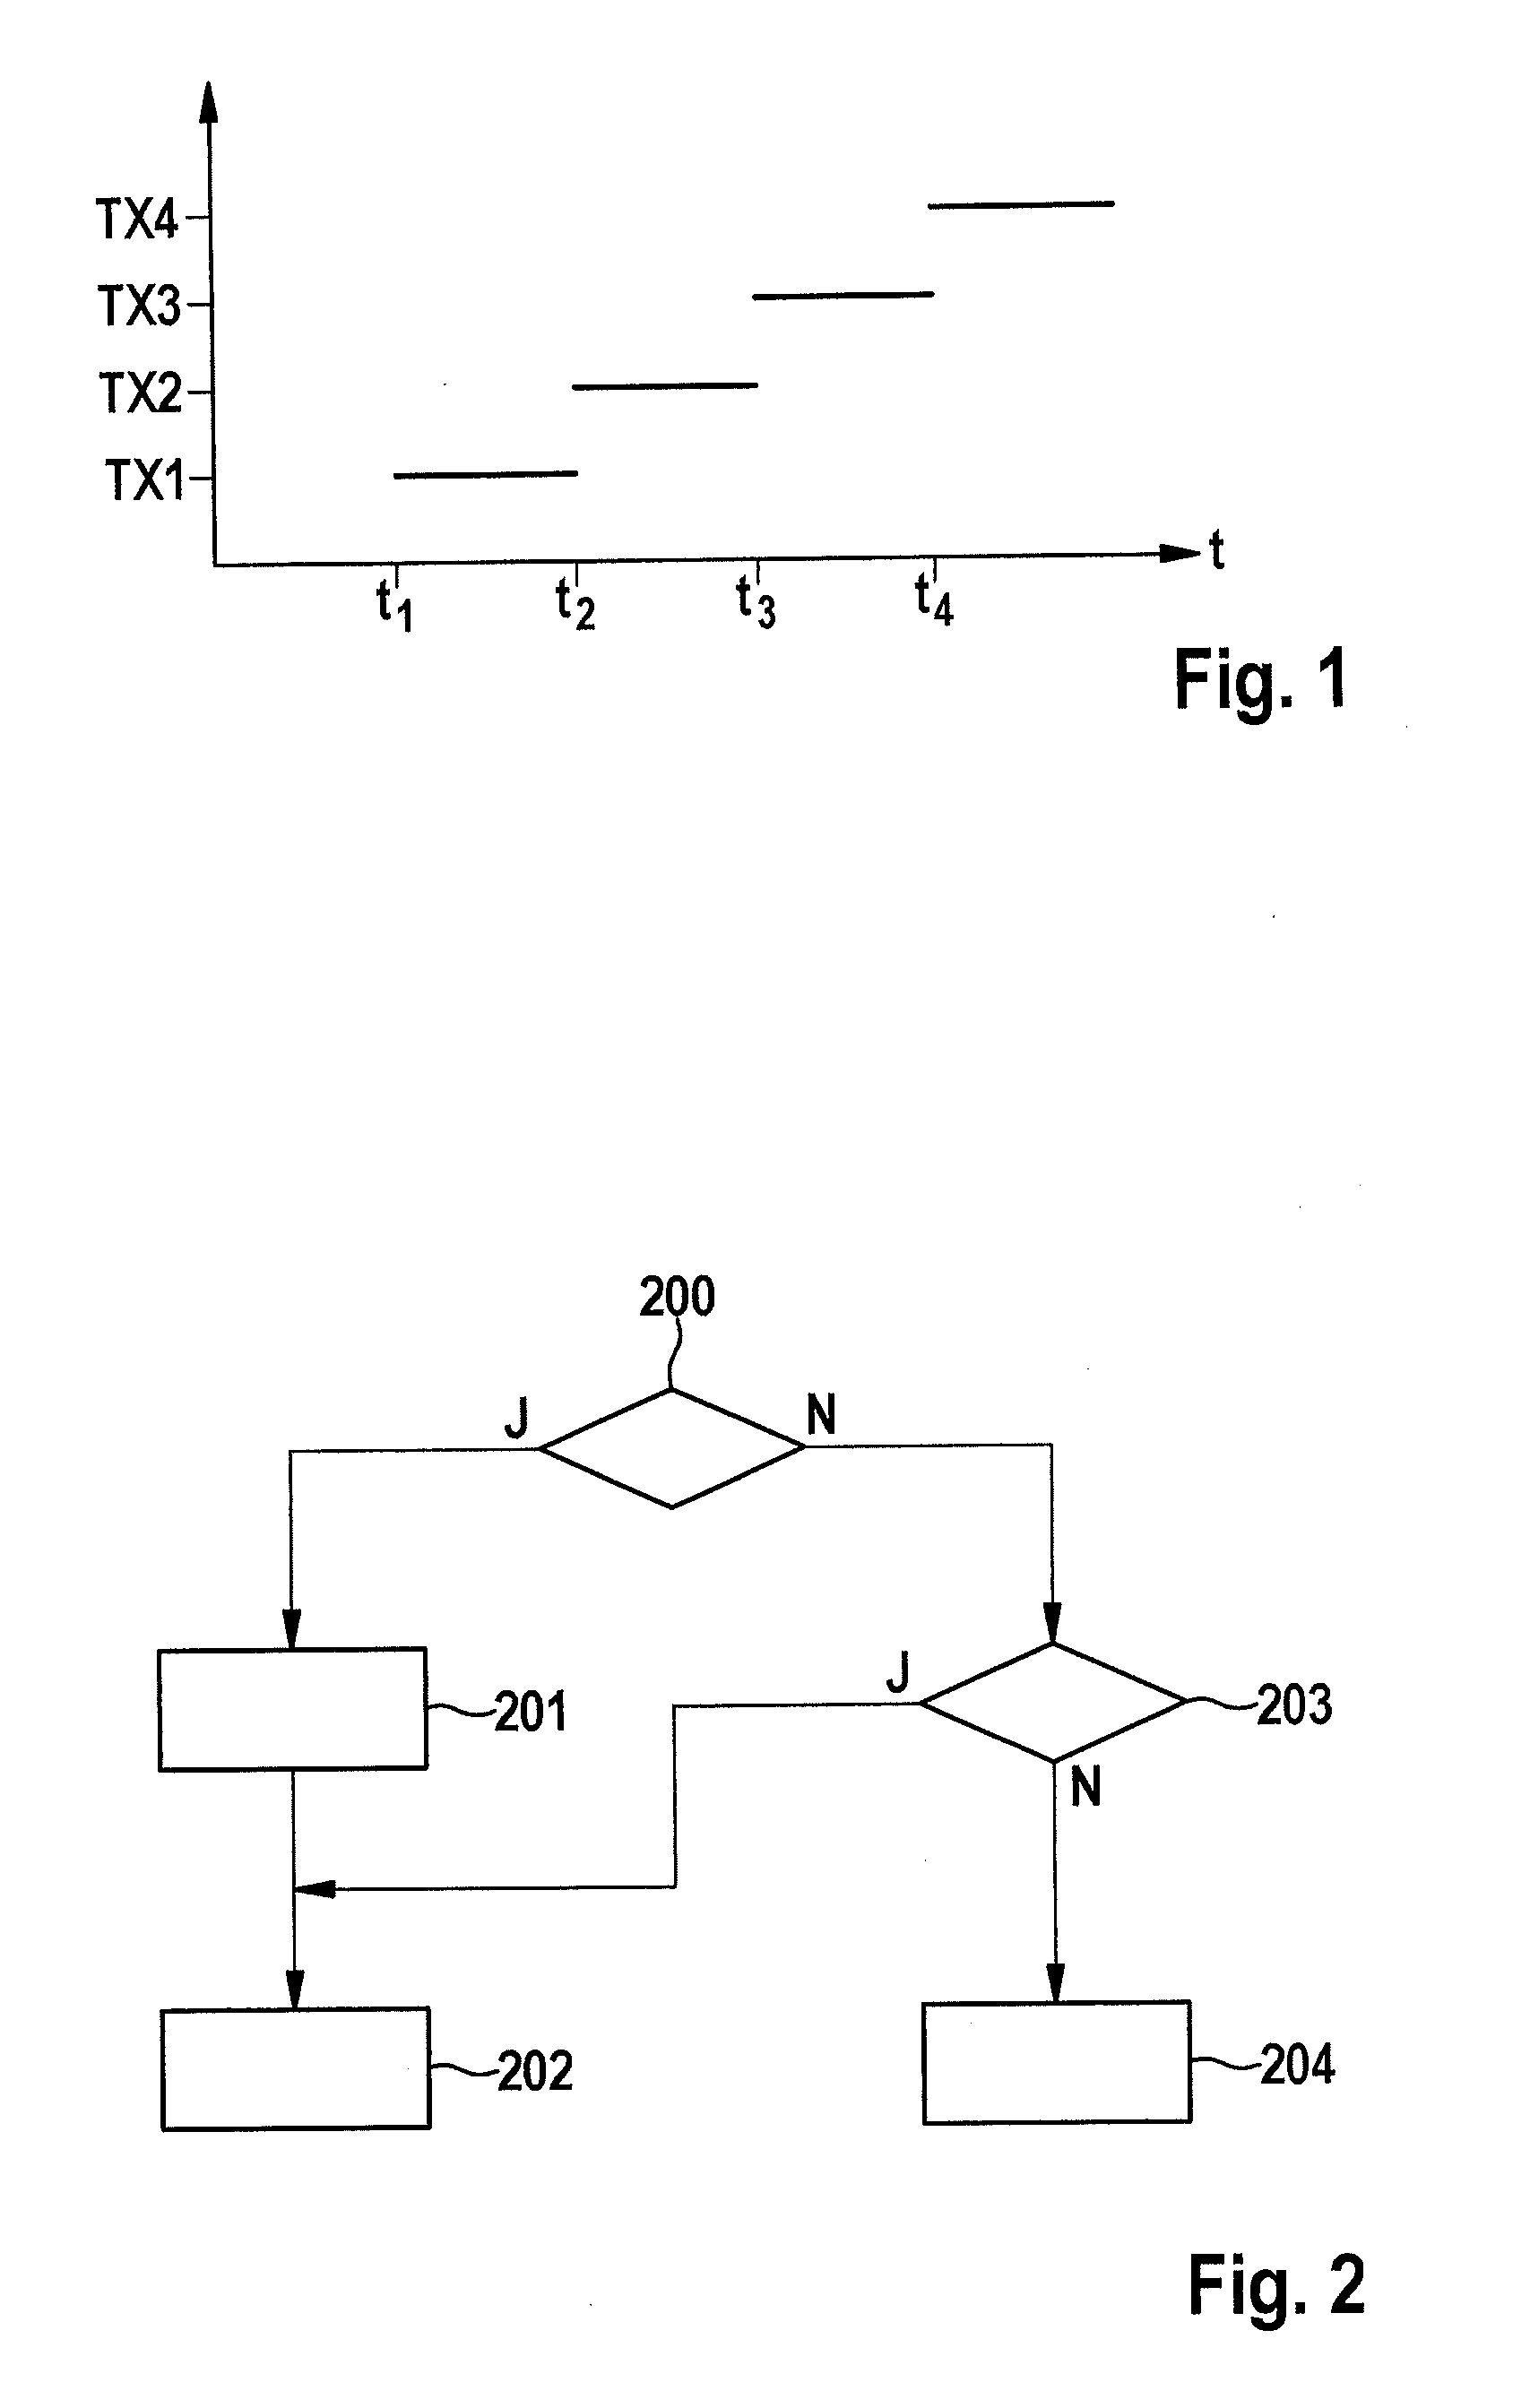 Method for operating a MIMO radar